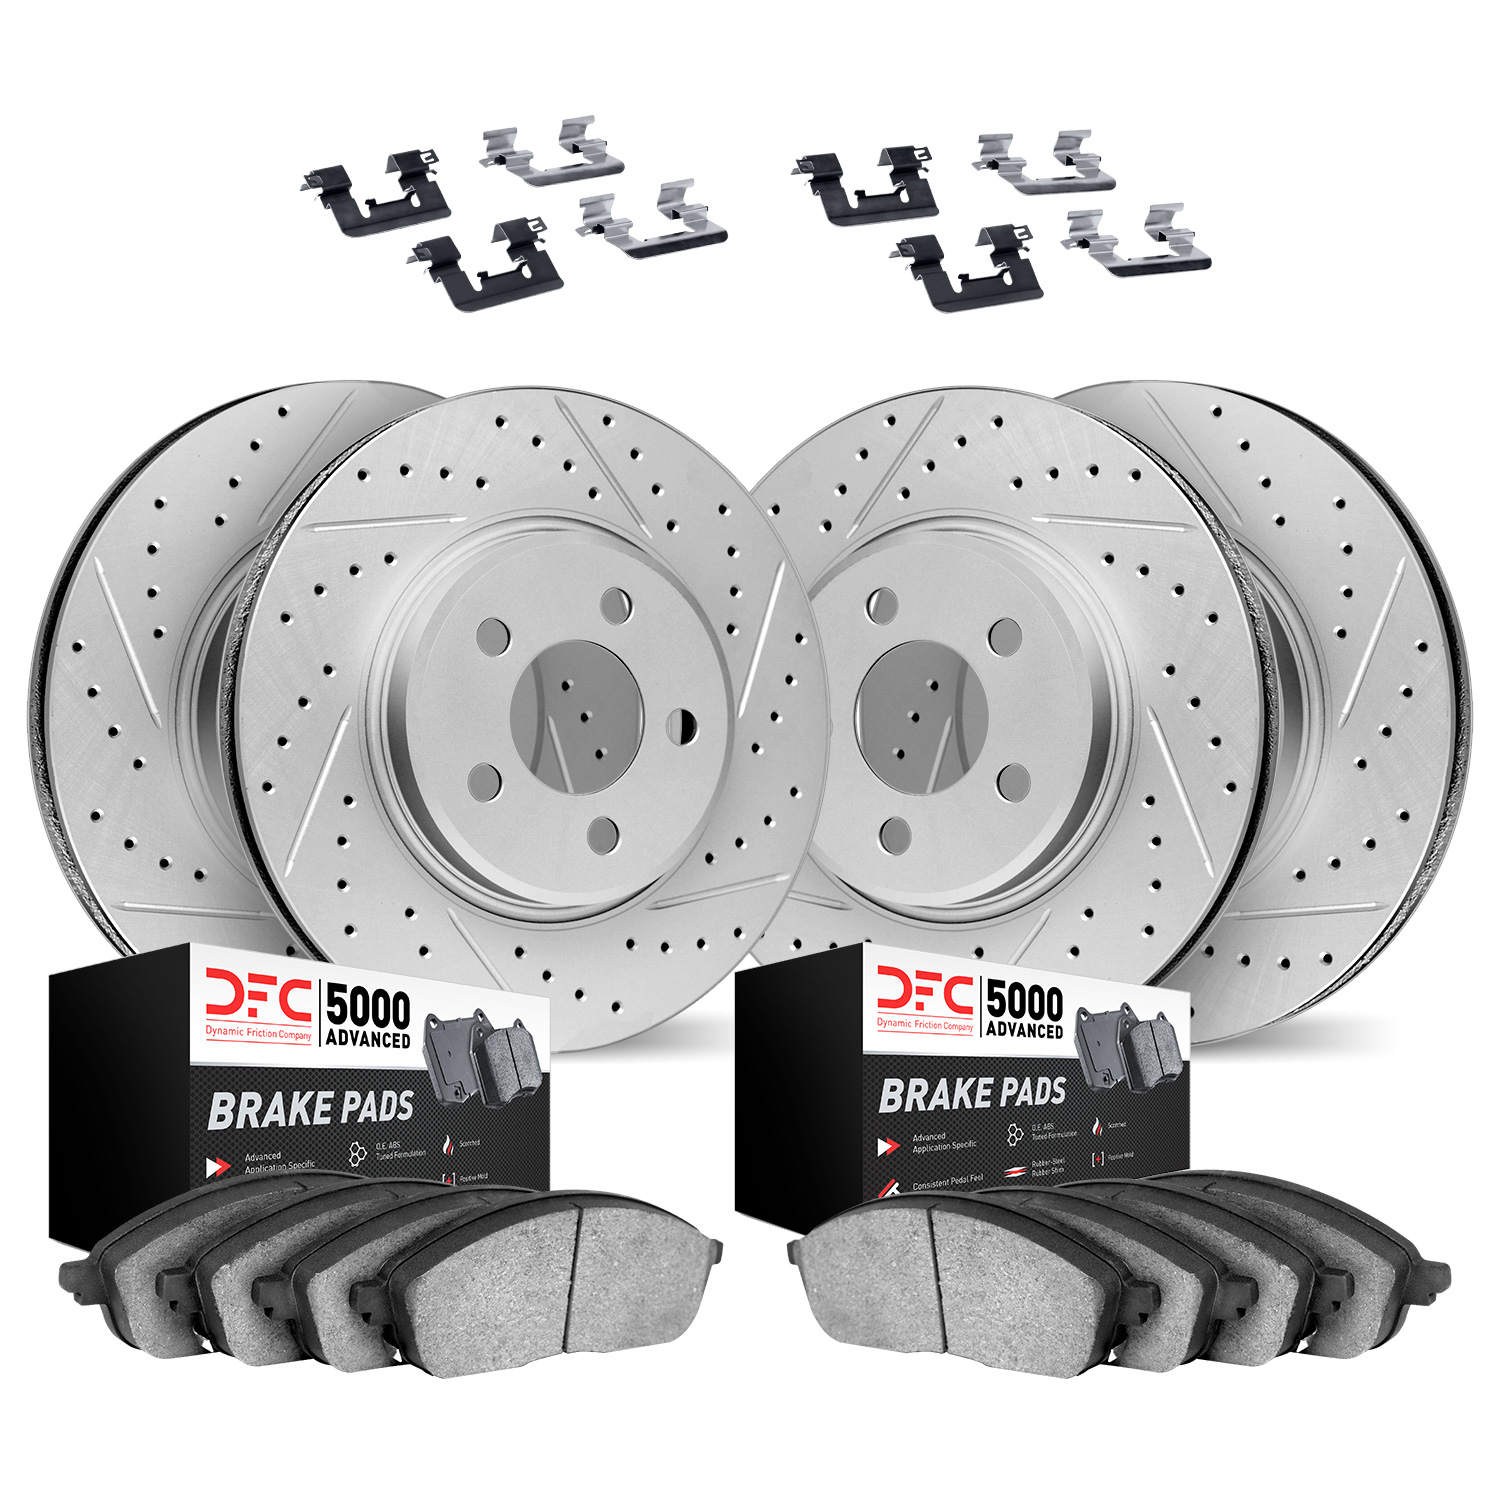 2514-47293 Geoperformance Drilled/Slotted Rotors w/5000 Advanced Brake Pads Kit & Hardware, 1968-1969 GM, Position: Front and Re